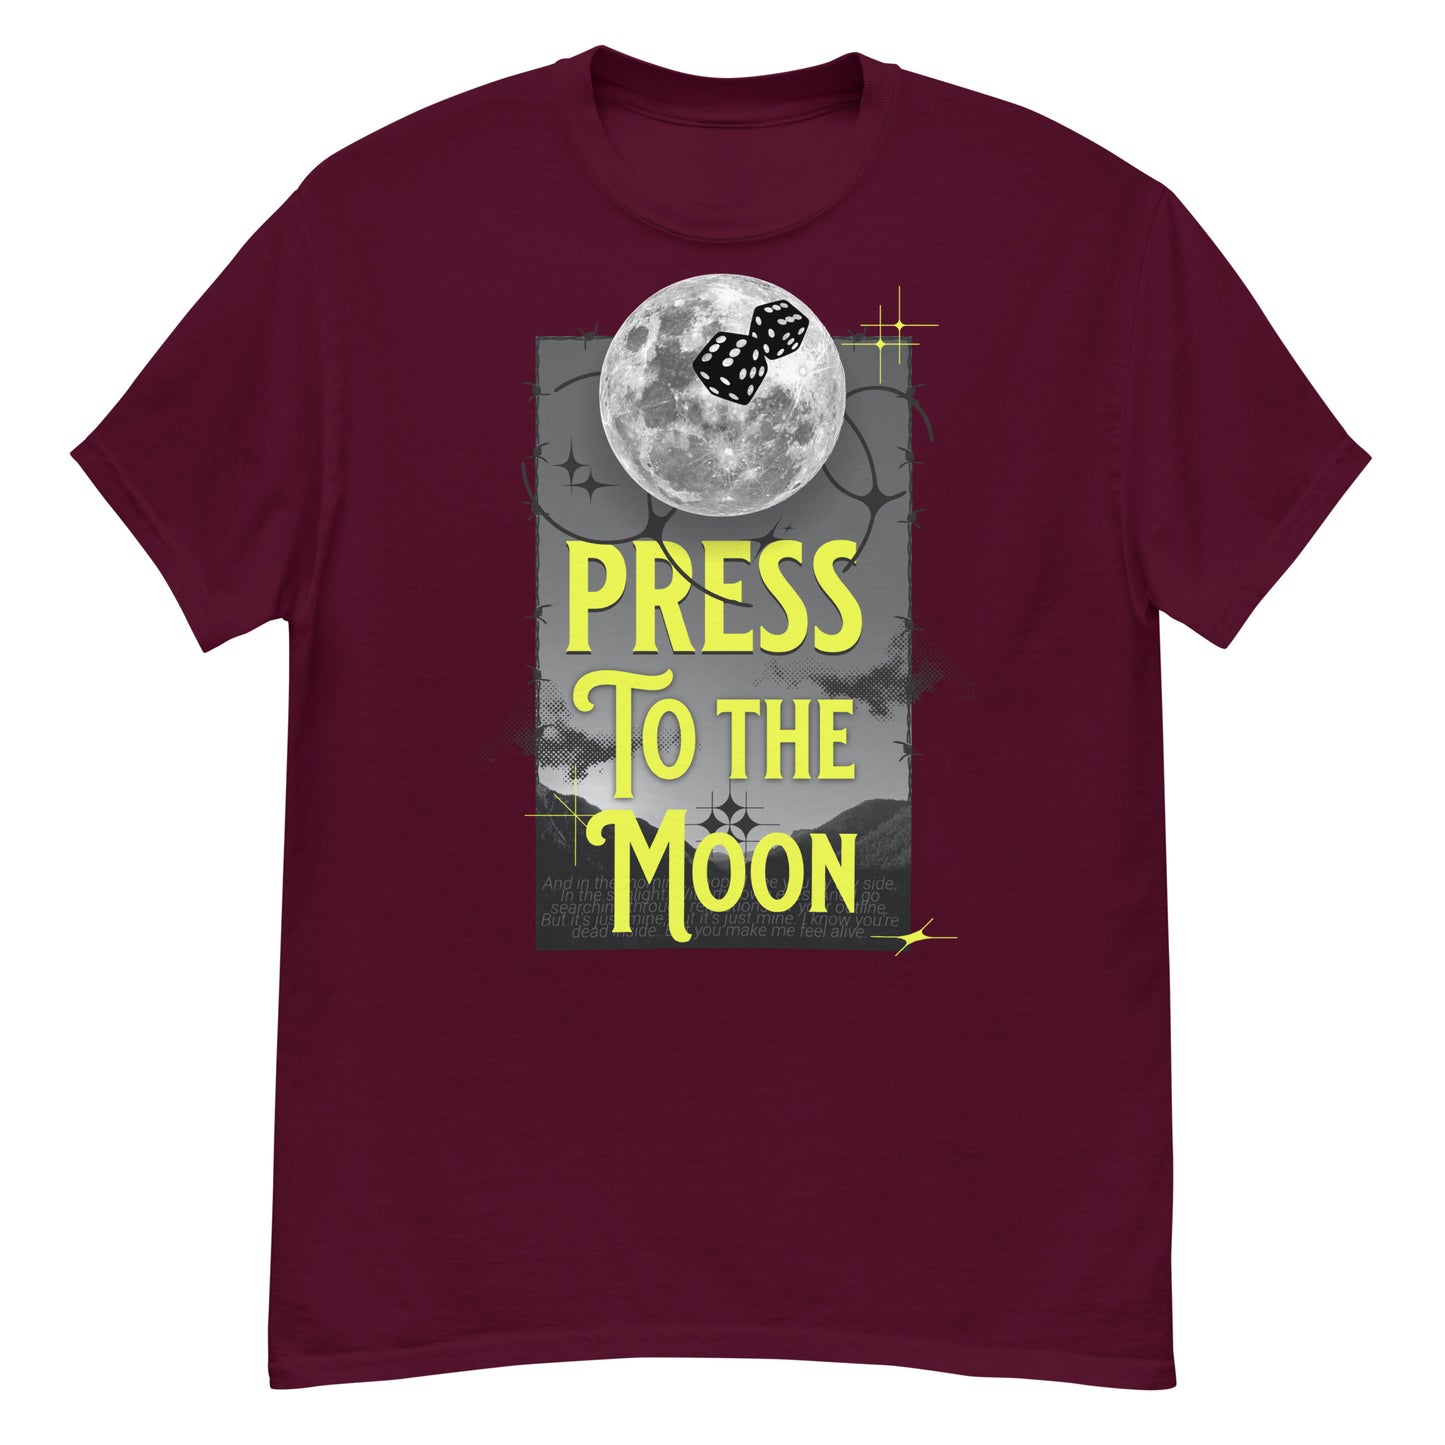 Press to the moon